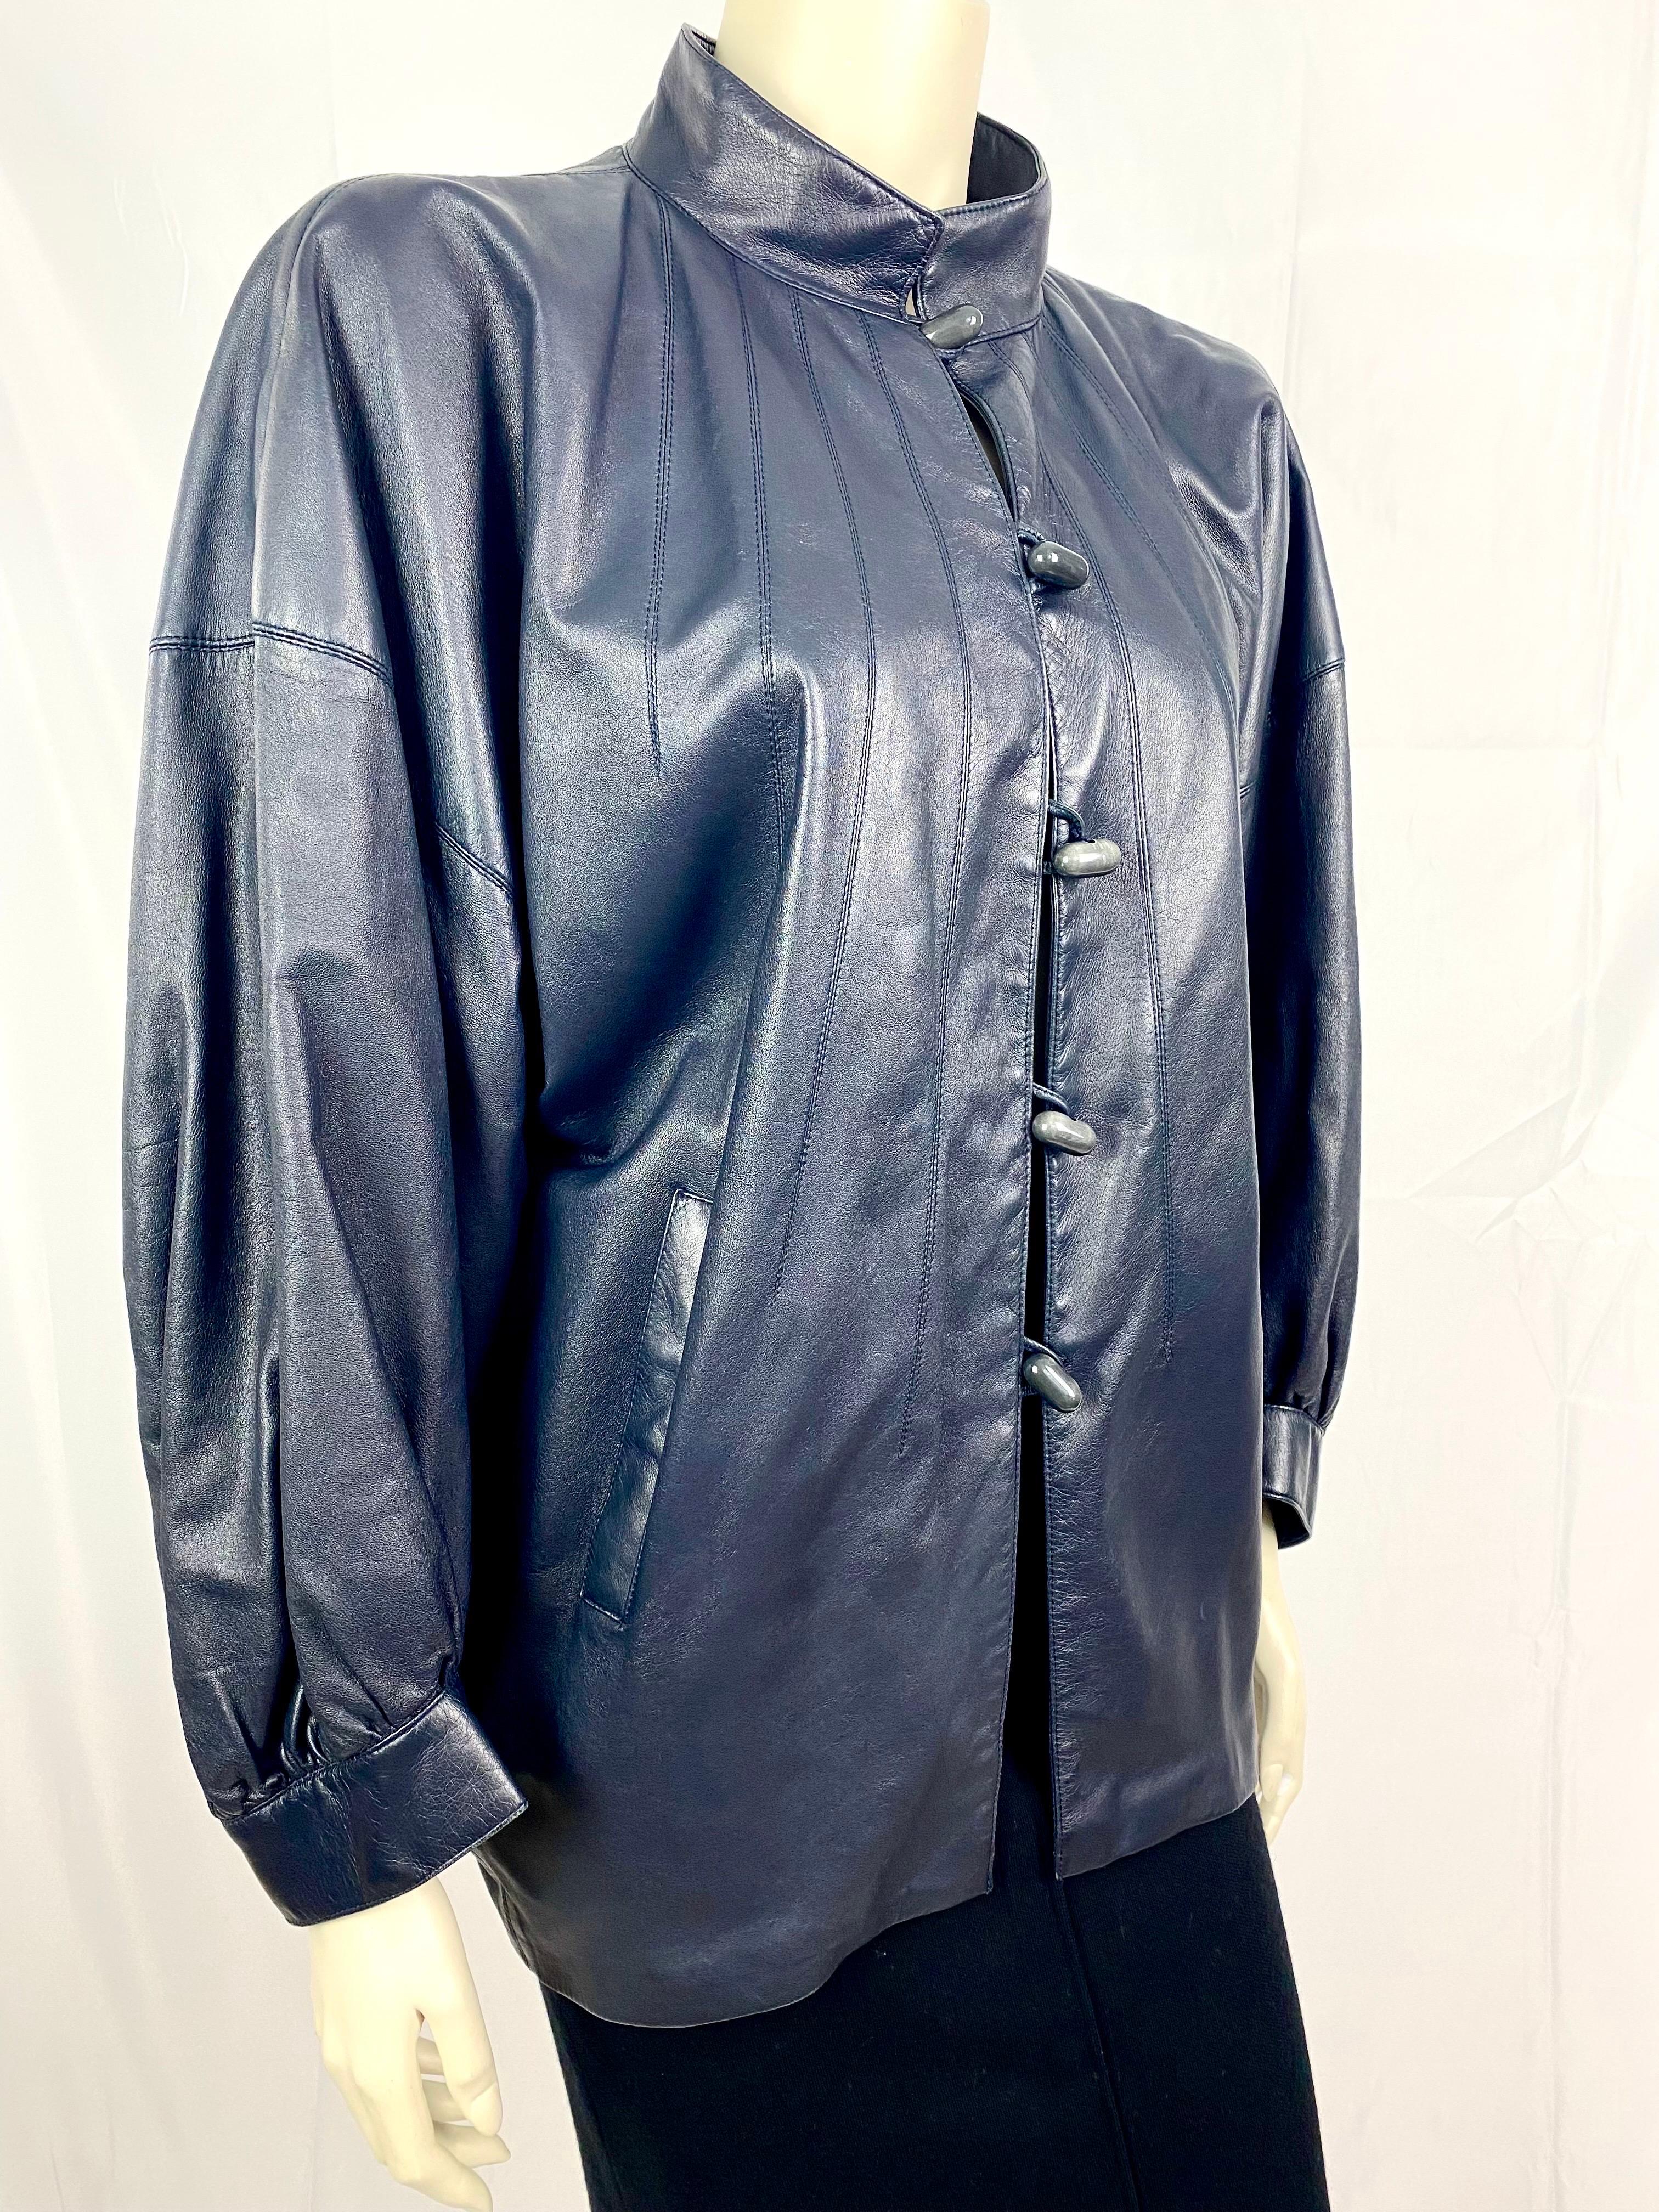 Vintage lamb leather jacket by Yves saint laurent rive gauche  from the 1980s 5